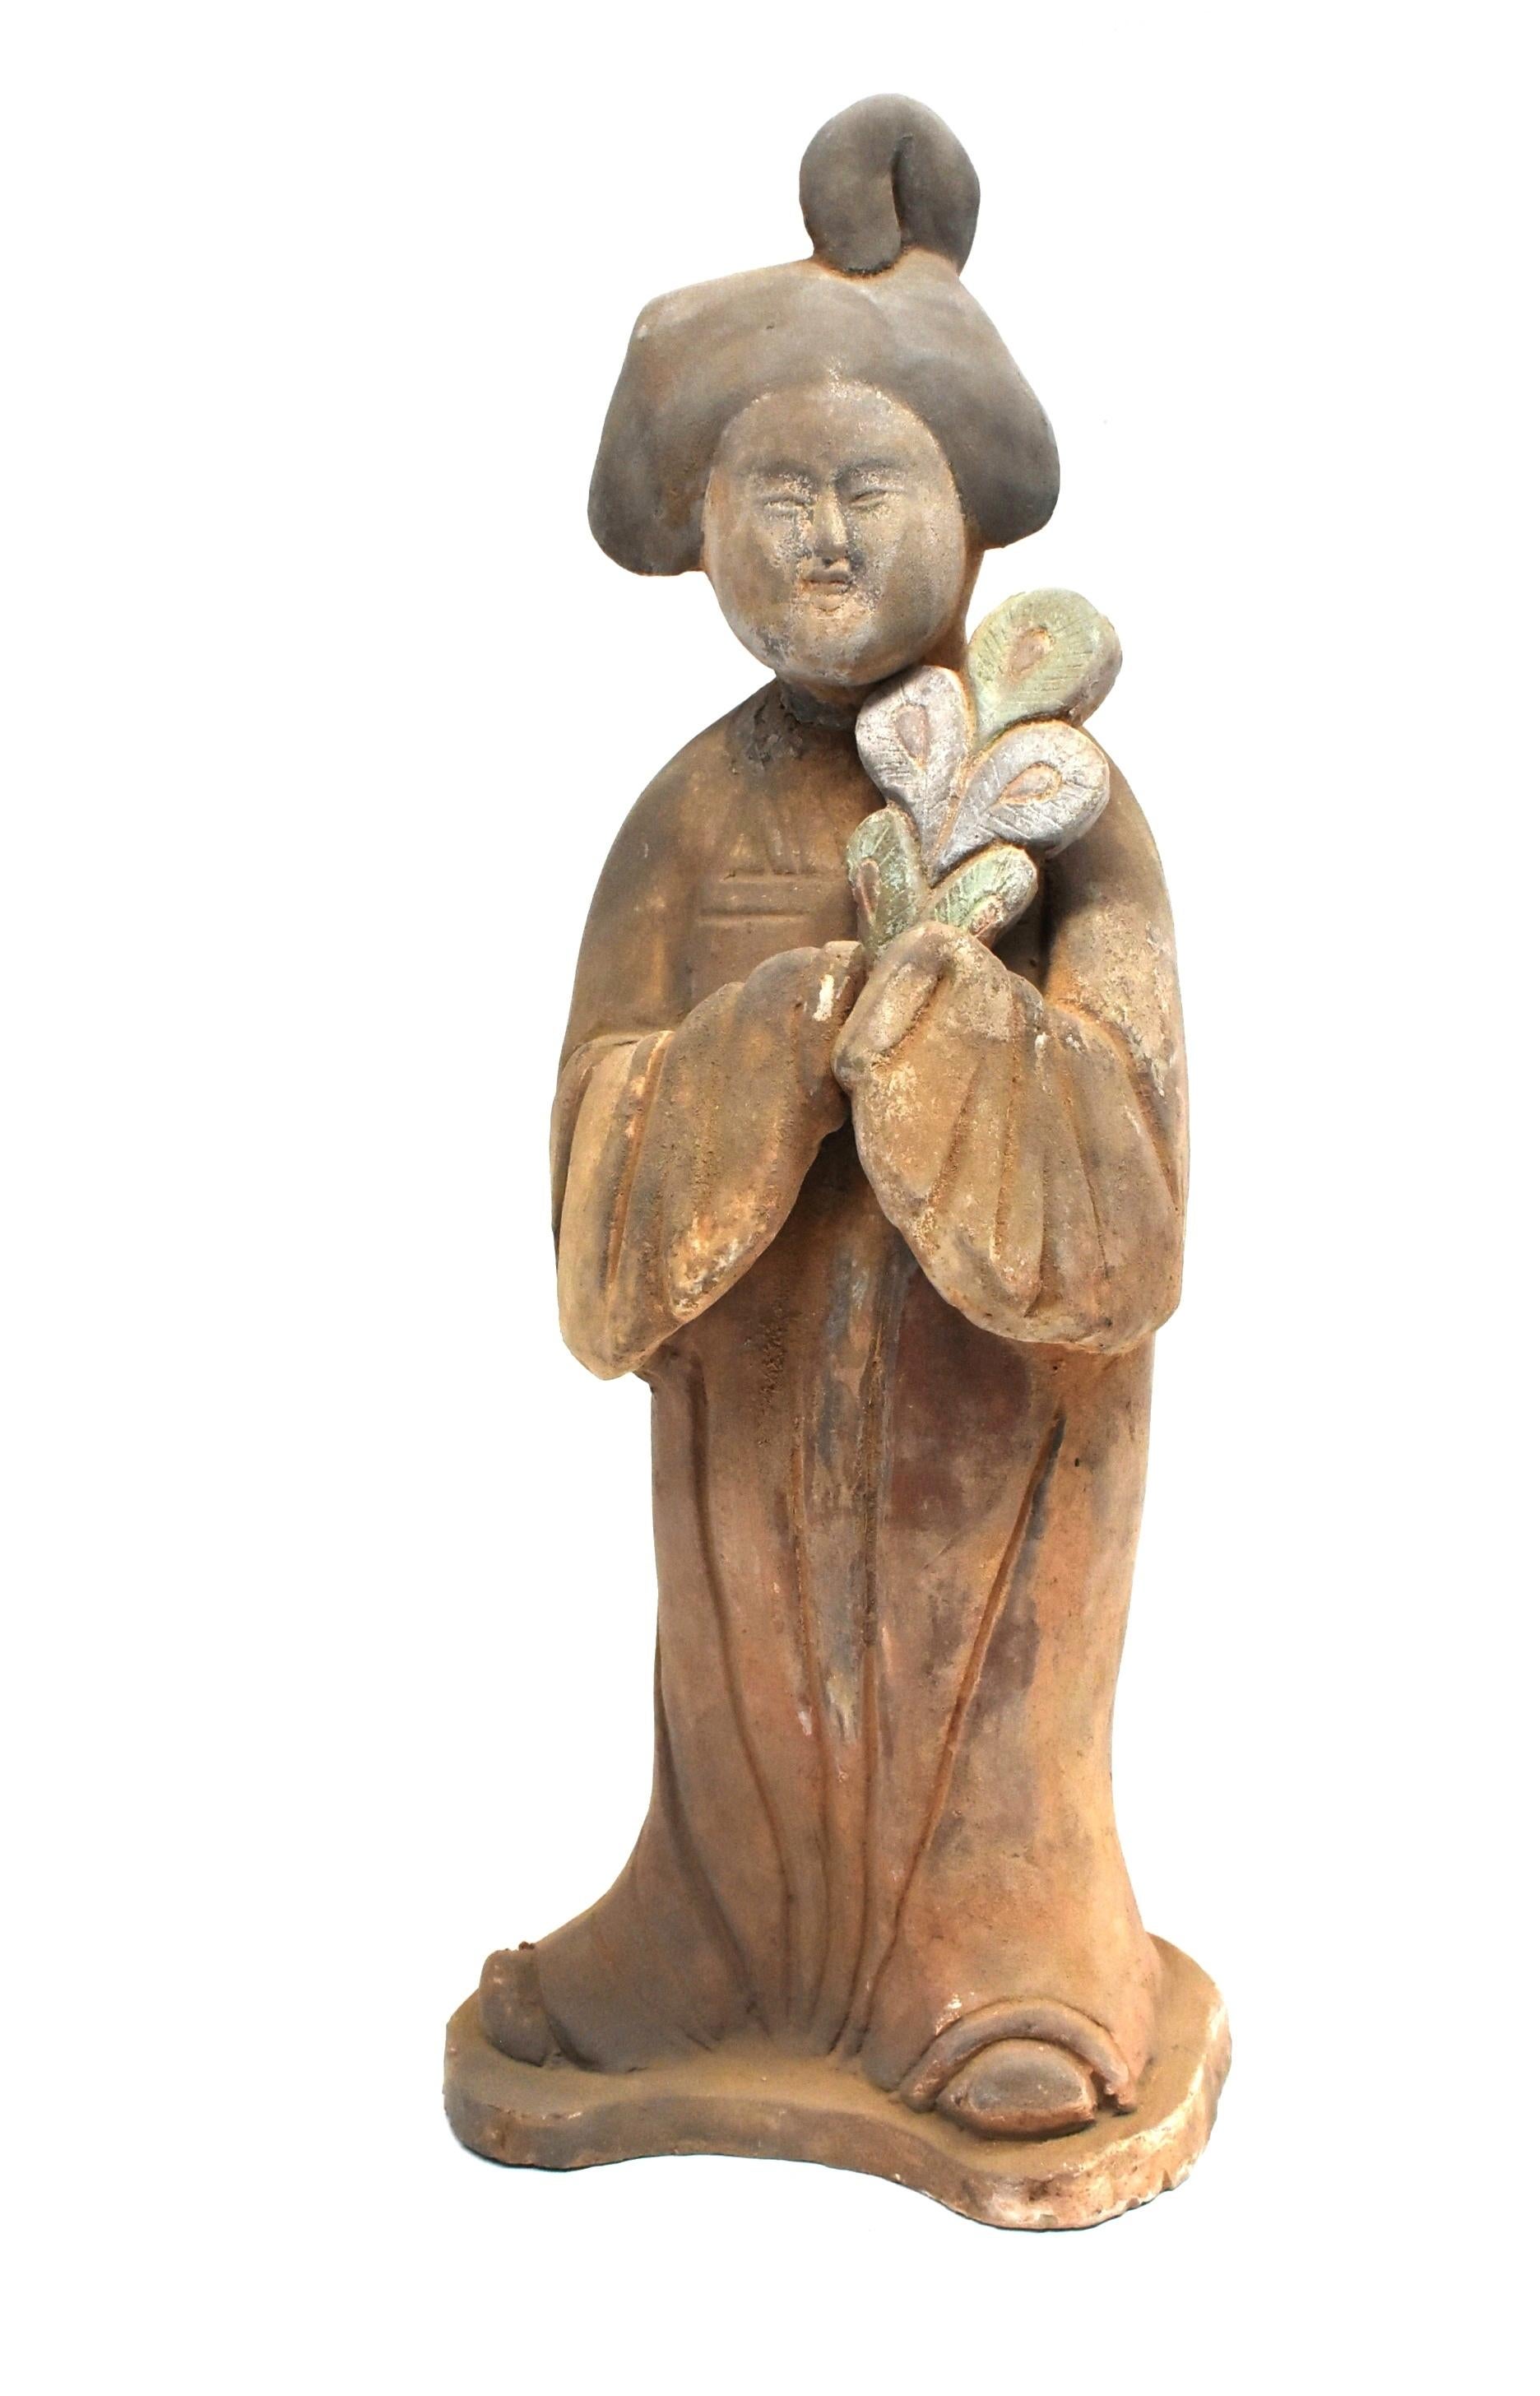 A beautiful terracotta court lady in the Tang dynasty style. Featured is a court lady holding a peacock feather. She is dressed in traditional high-waist dress with hair done in the Tang dynasty fashion. Facial features typical of the era.

 